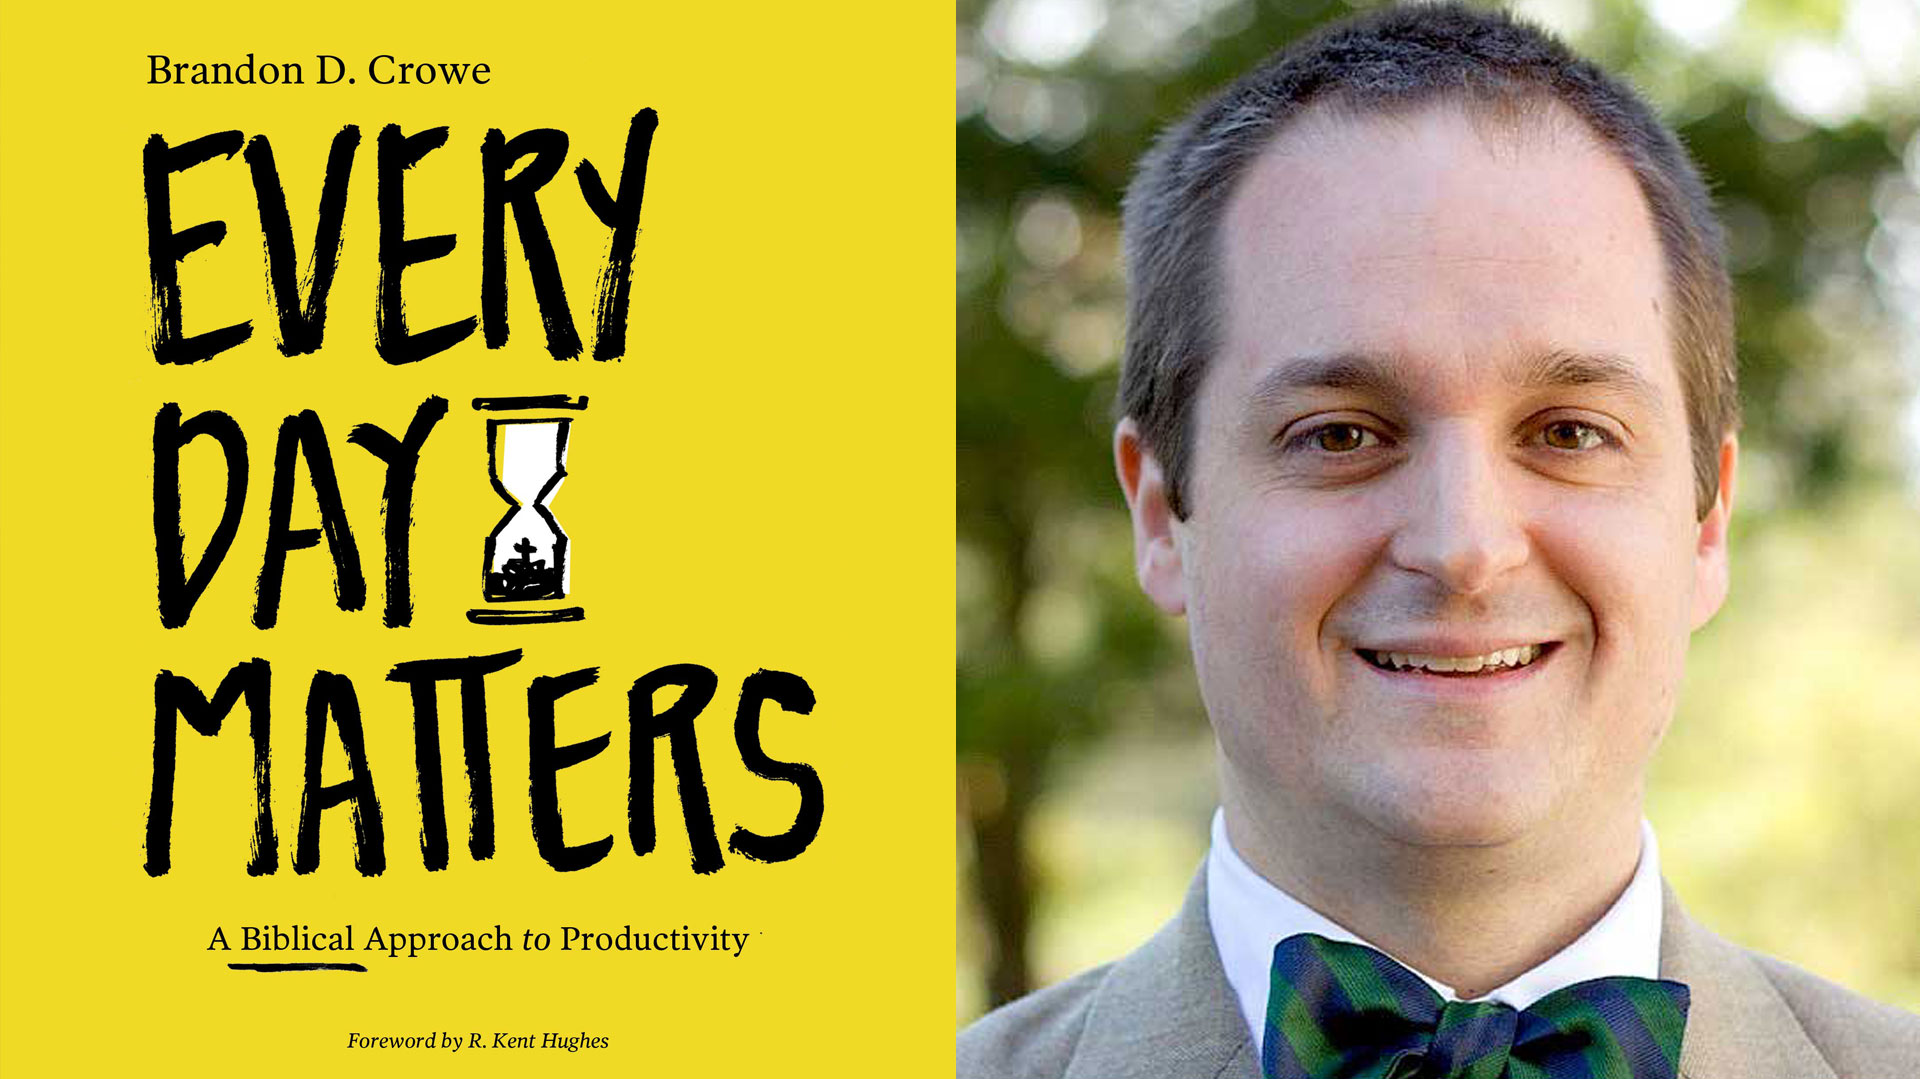 Every Day Matters – Interview with Brandon D. Crowe